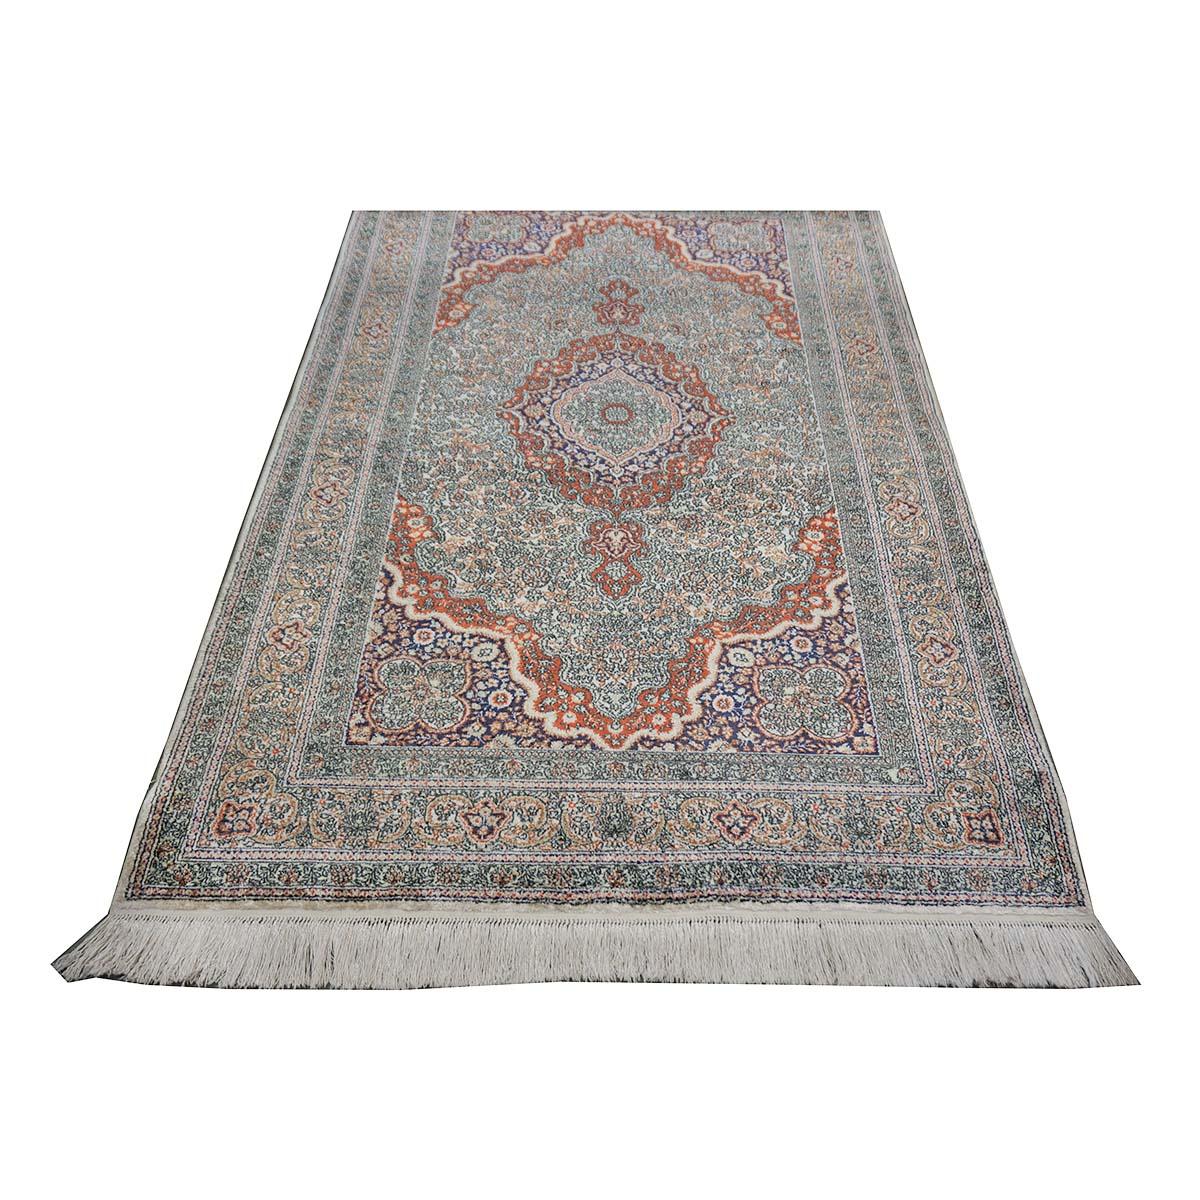  Ashly Fine Rugs presents a 1980s Vintage Sino-Persian Fine Silk Hereke 3x5 Handmade Rug. Sino-Persian rugs was the name given to the Persian-styled handmade rugs being produced by the Peoples Republic of China in the late 1980s when the US placed